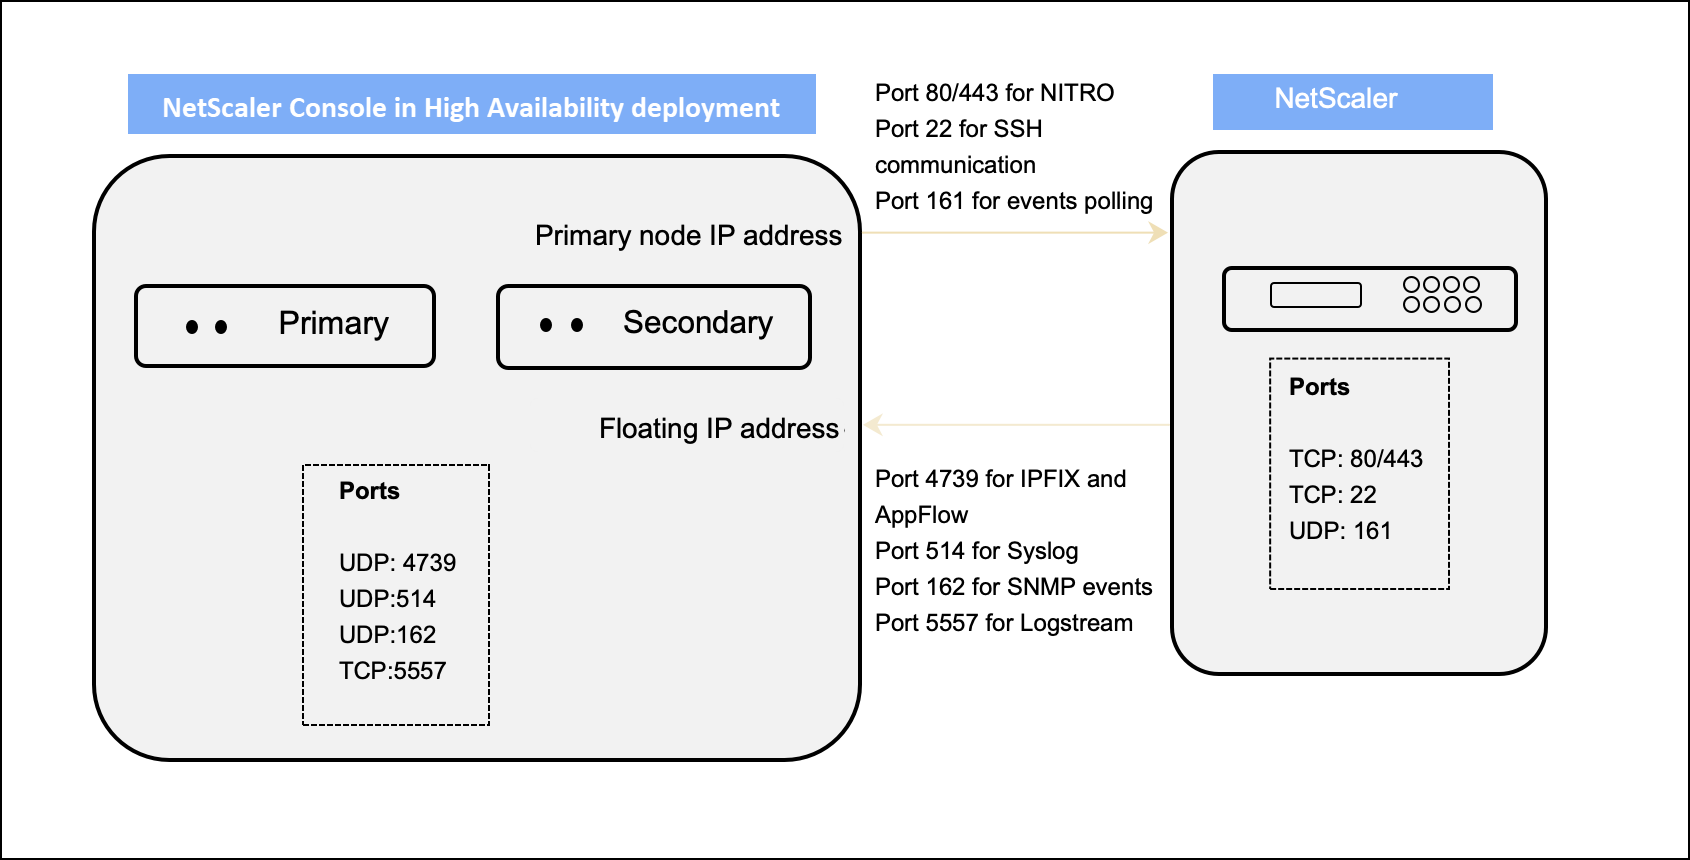 Network ports with agent deployment